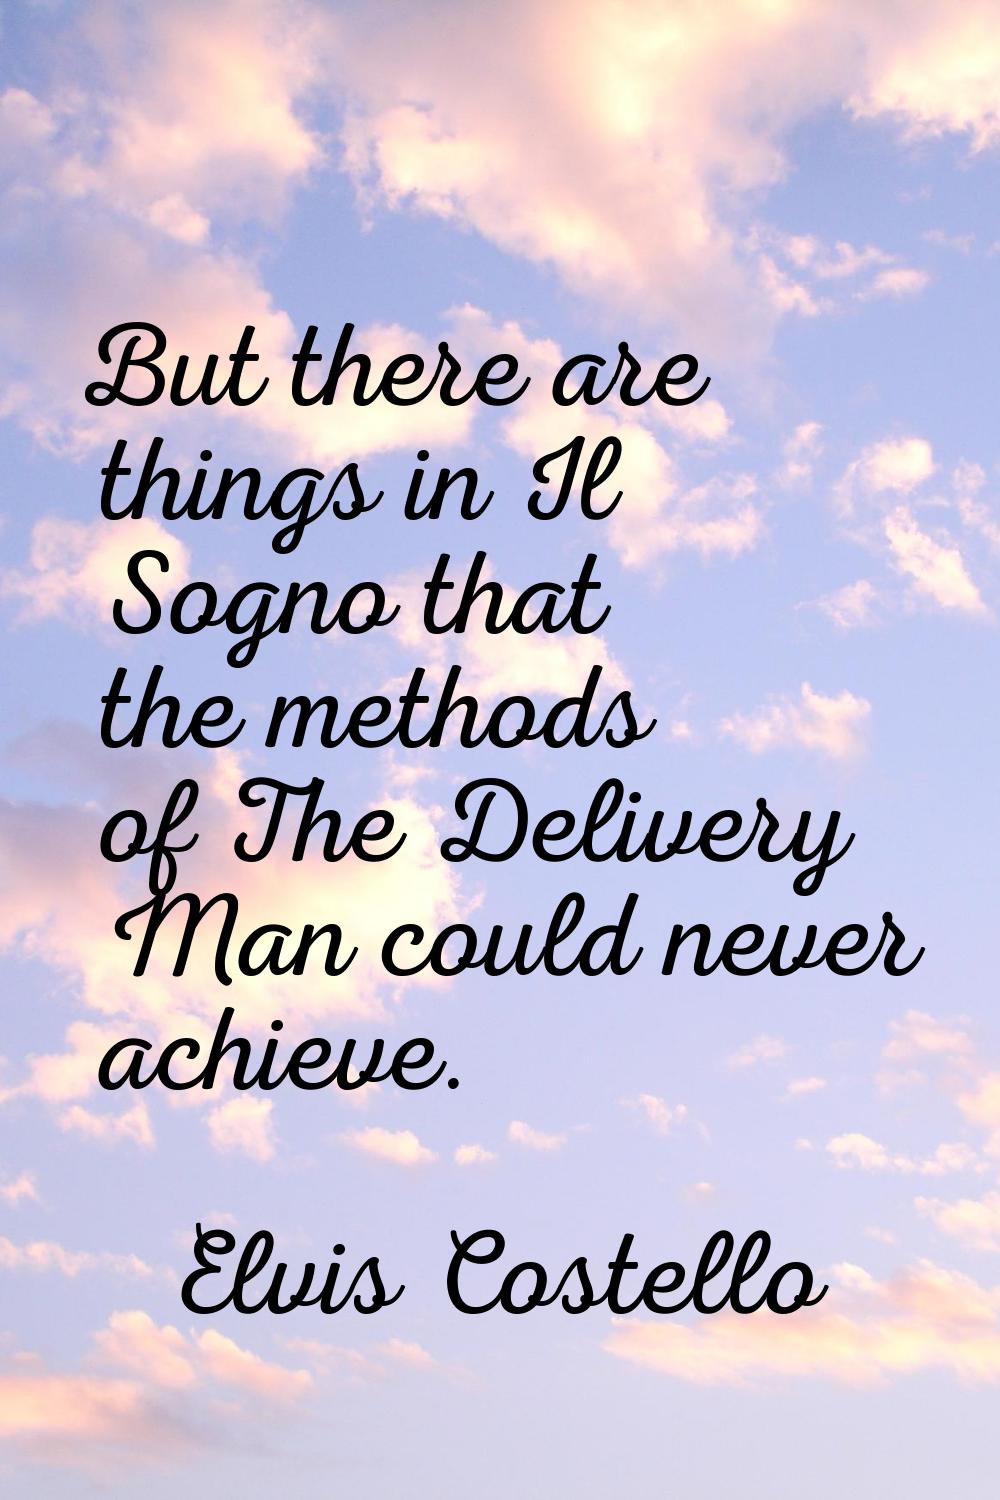 But there are things in Il Sogno that the methods of The Delivery Man could never achieve.